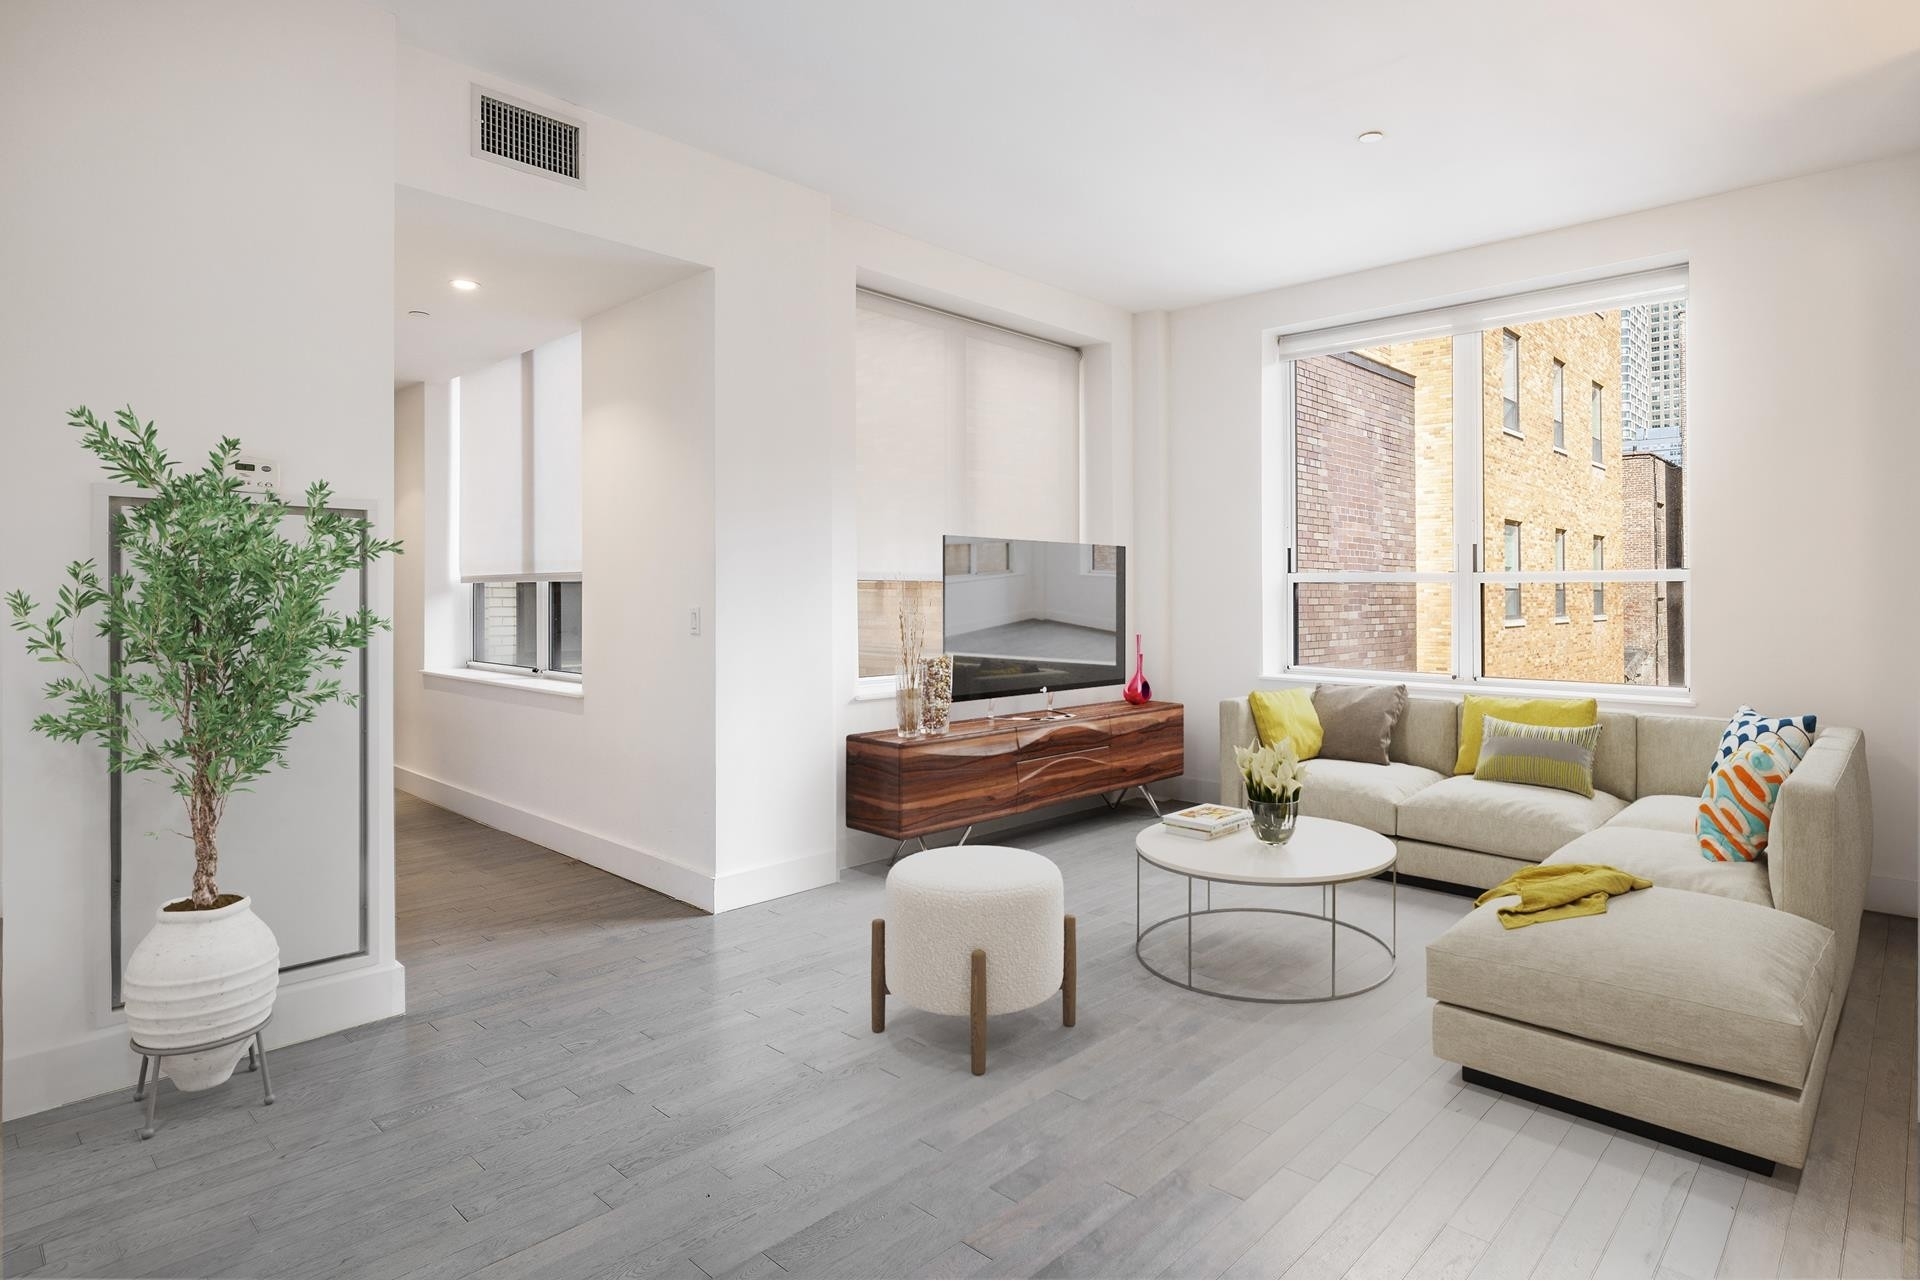 Property at Nine52, 416 W 52ND ST, 406 Hell's Kitchen, New York, New York 10019